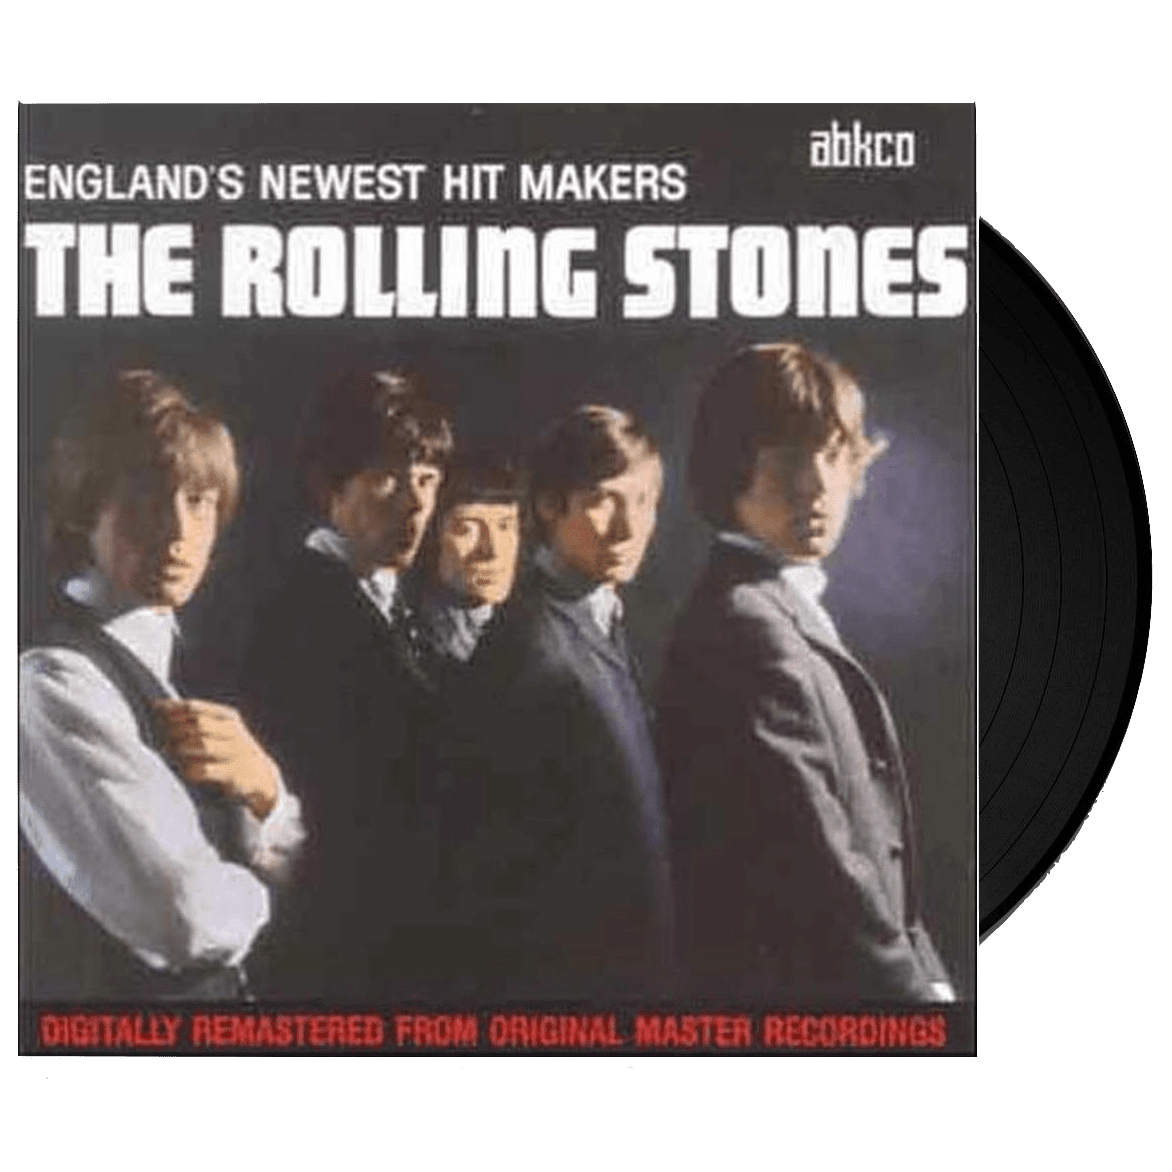 The Rolling Stones - England's Newest Hit Makers (Import, Remastered) (LP) - Joco Records